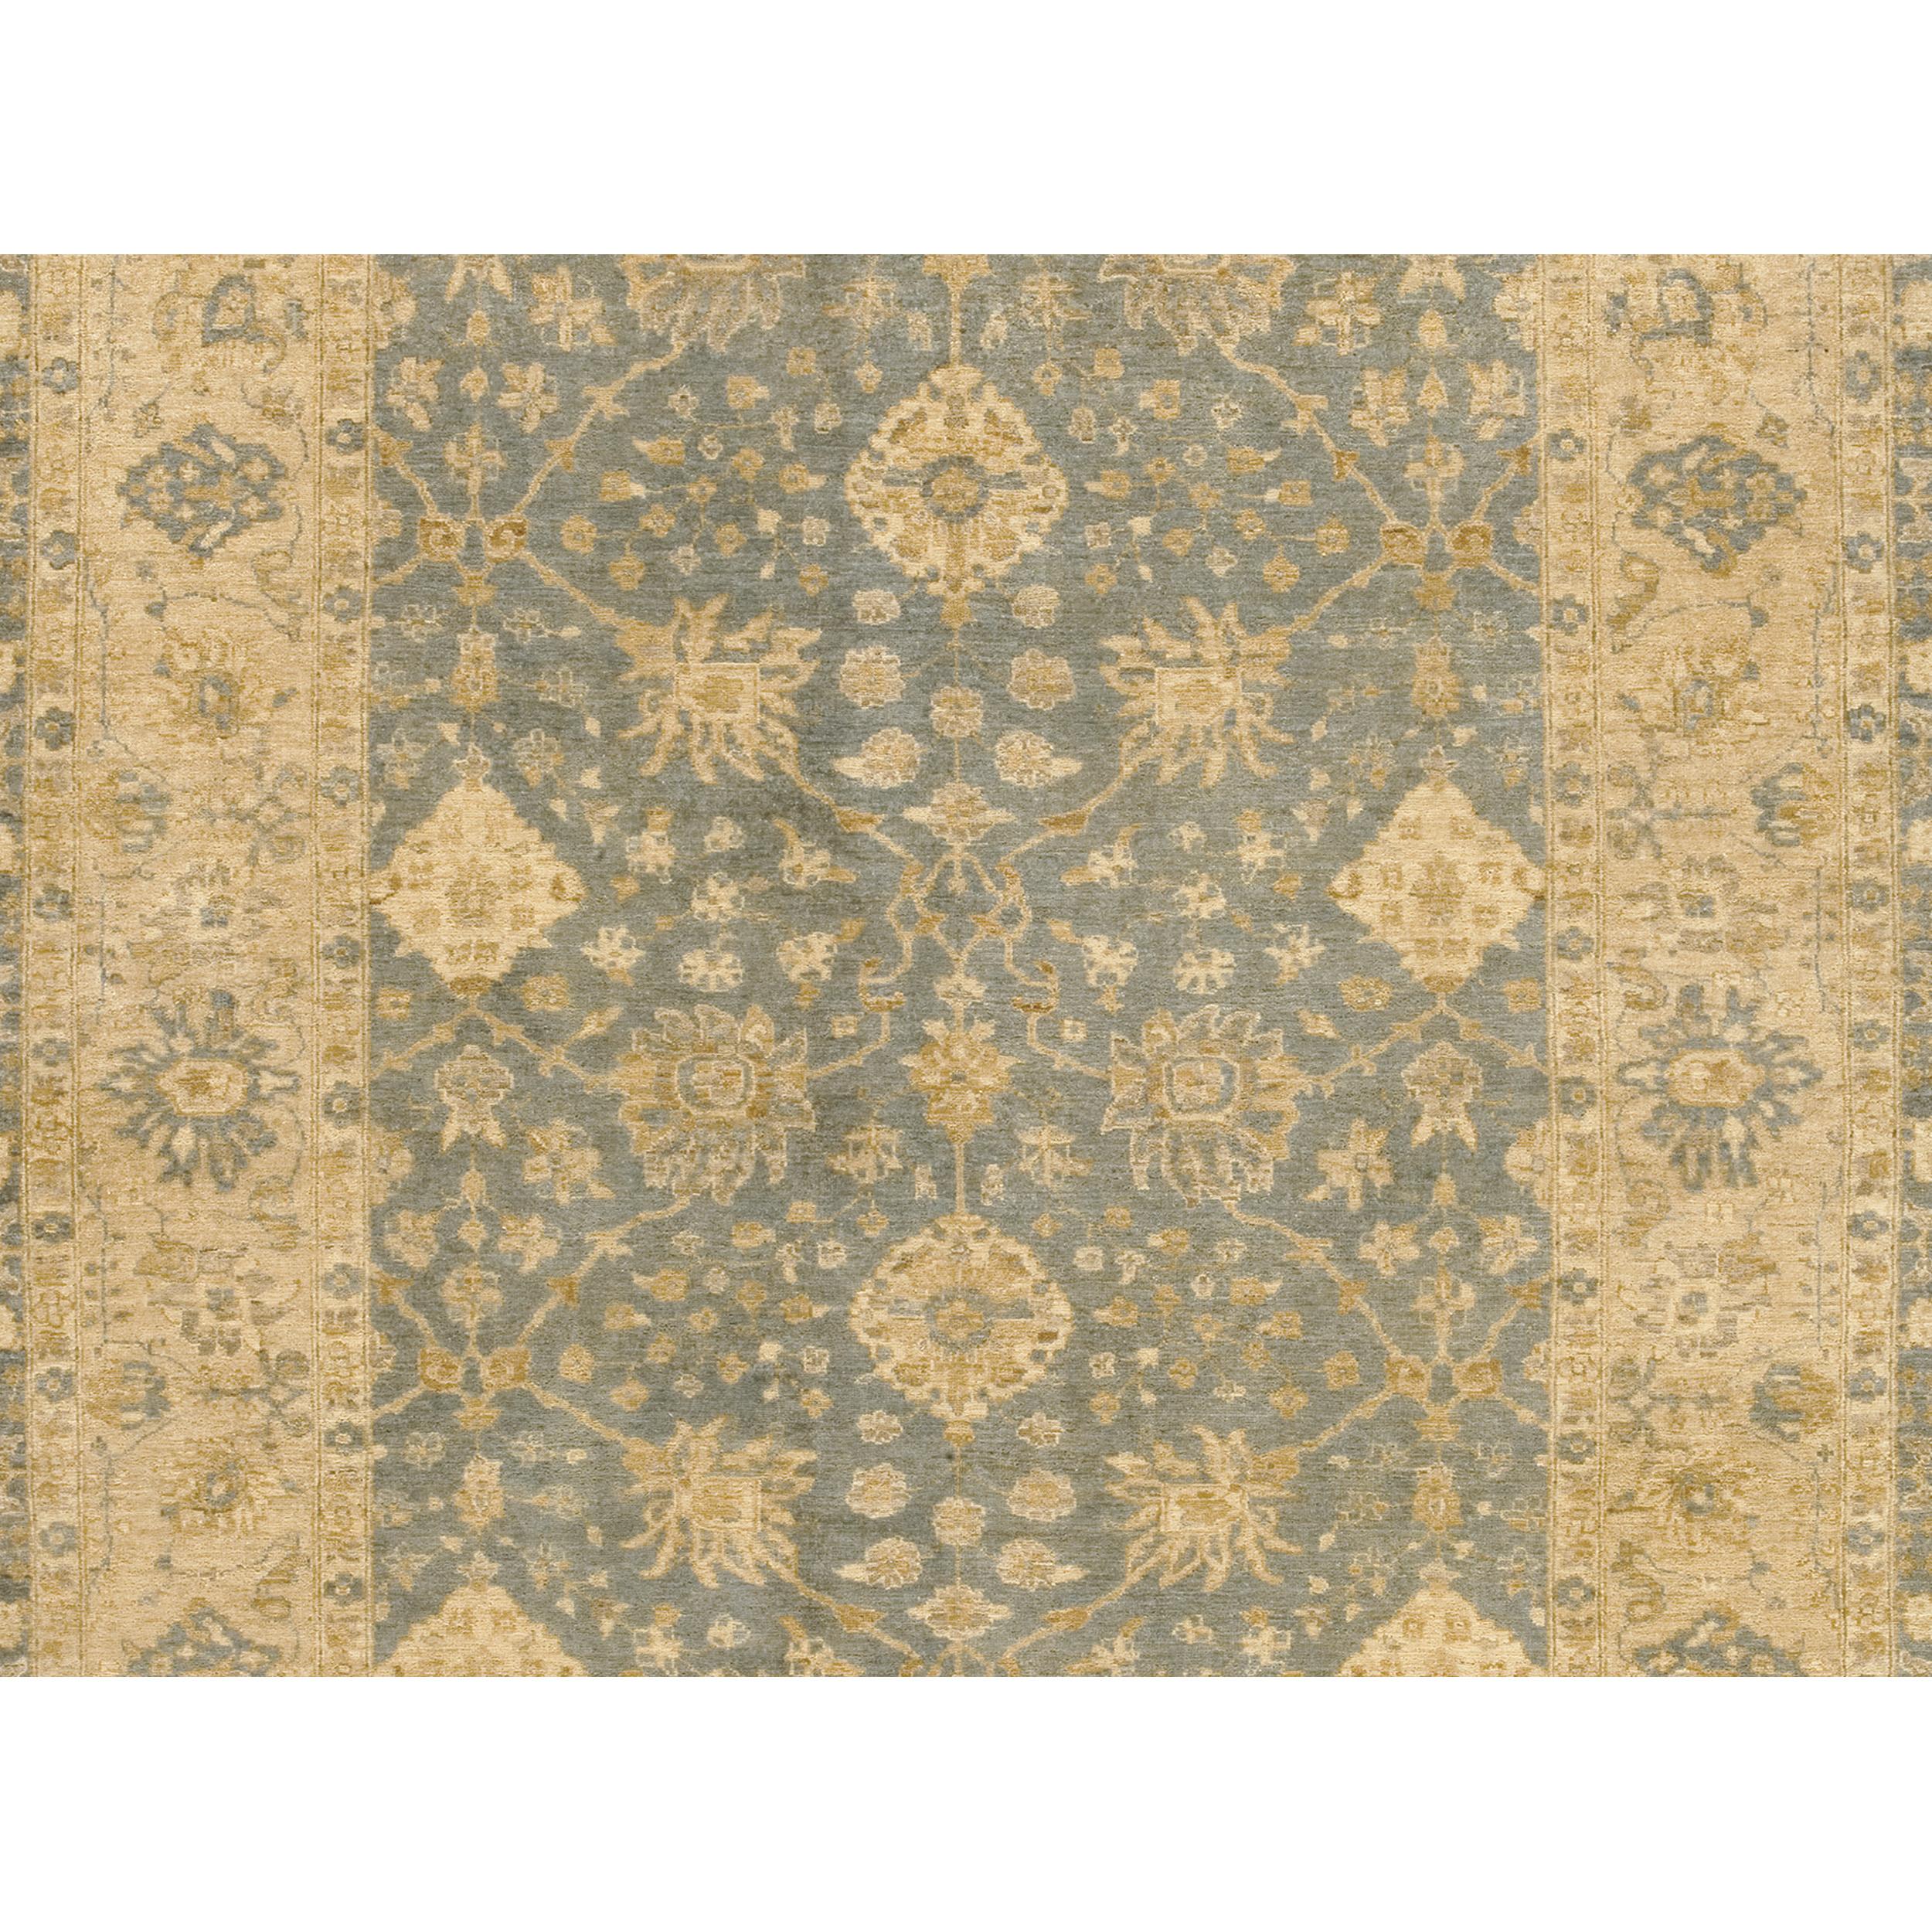 Luxury Traditional Hand-Knotted Angora Light Blue & Cream 10X18 Rug In New Condition For Sale In Secaucus, NJ